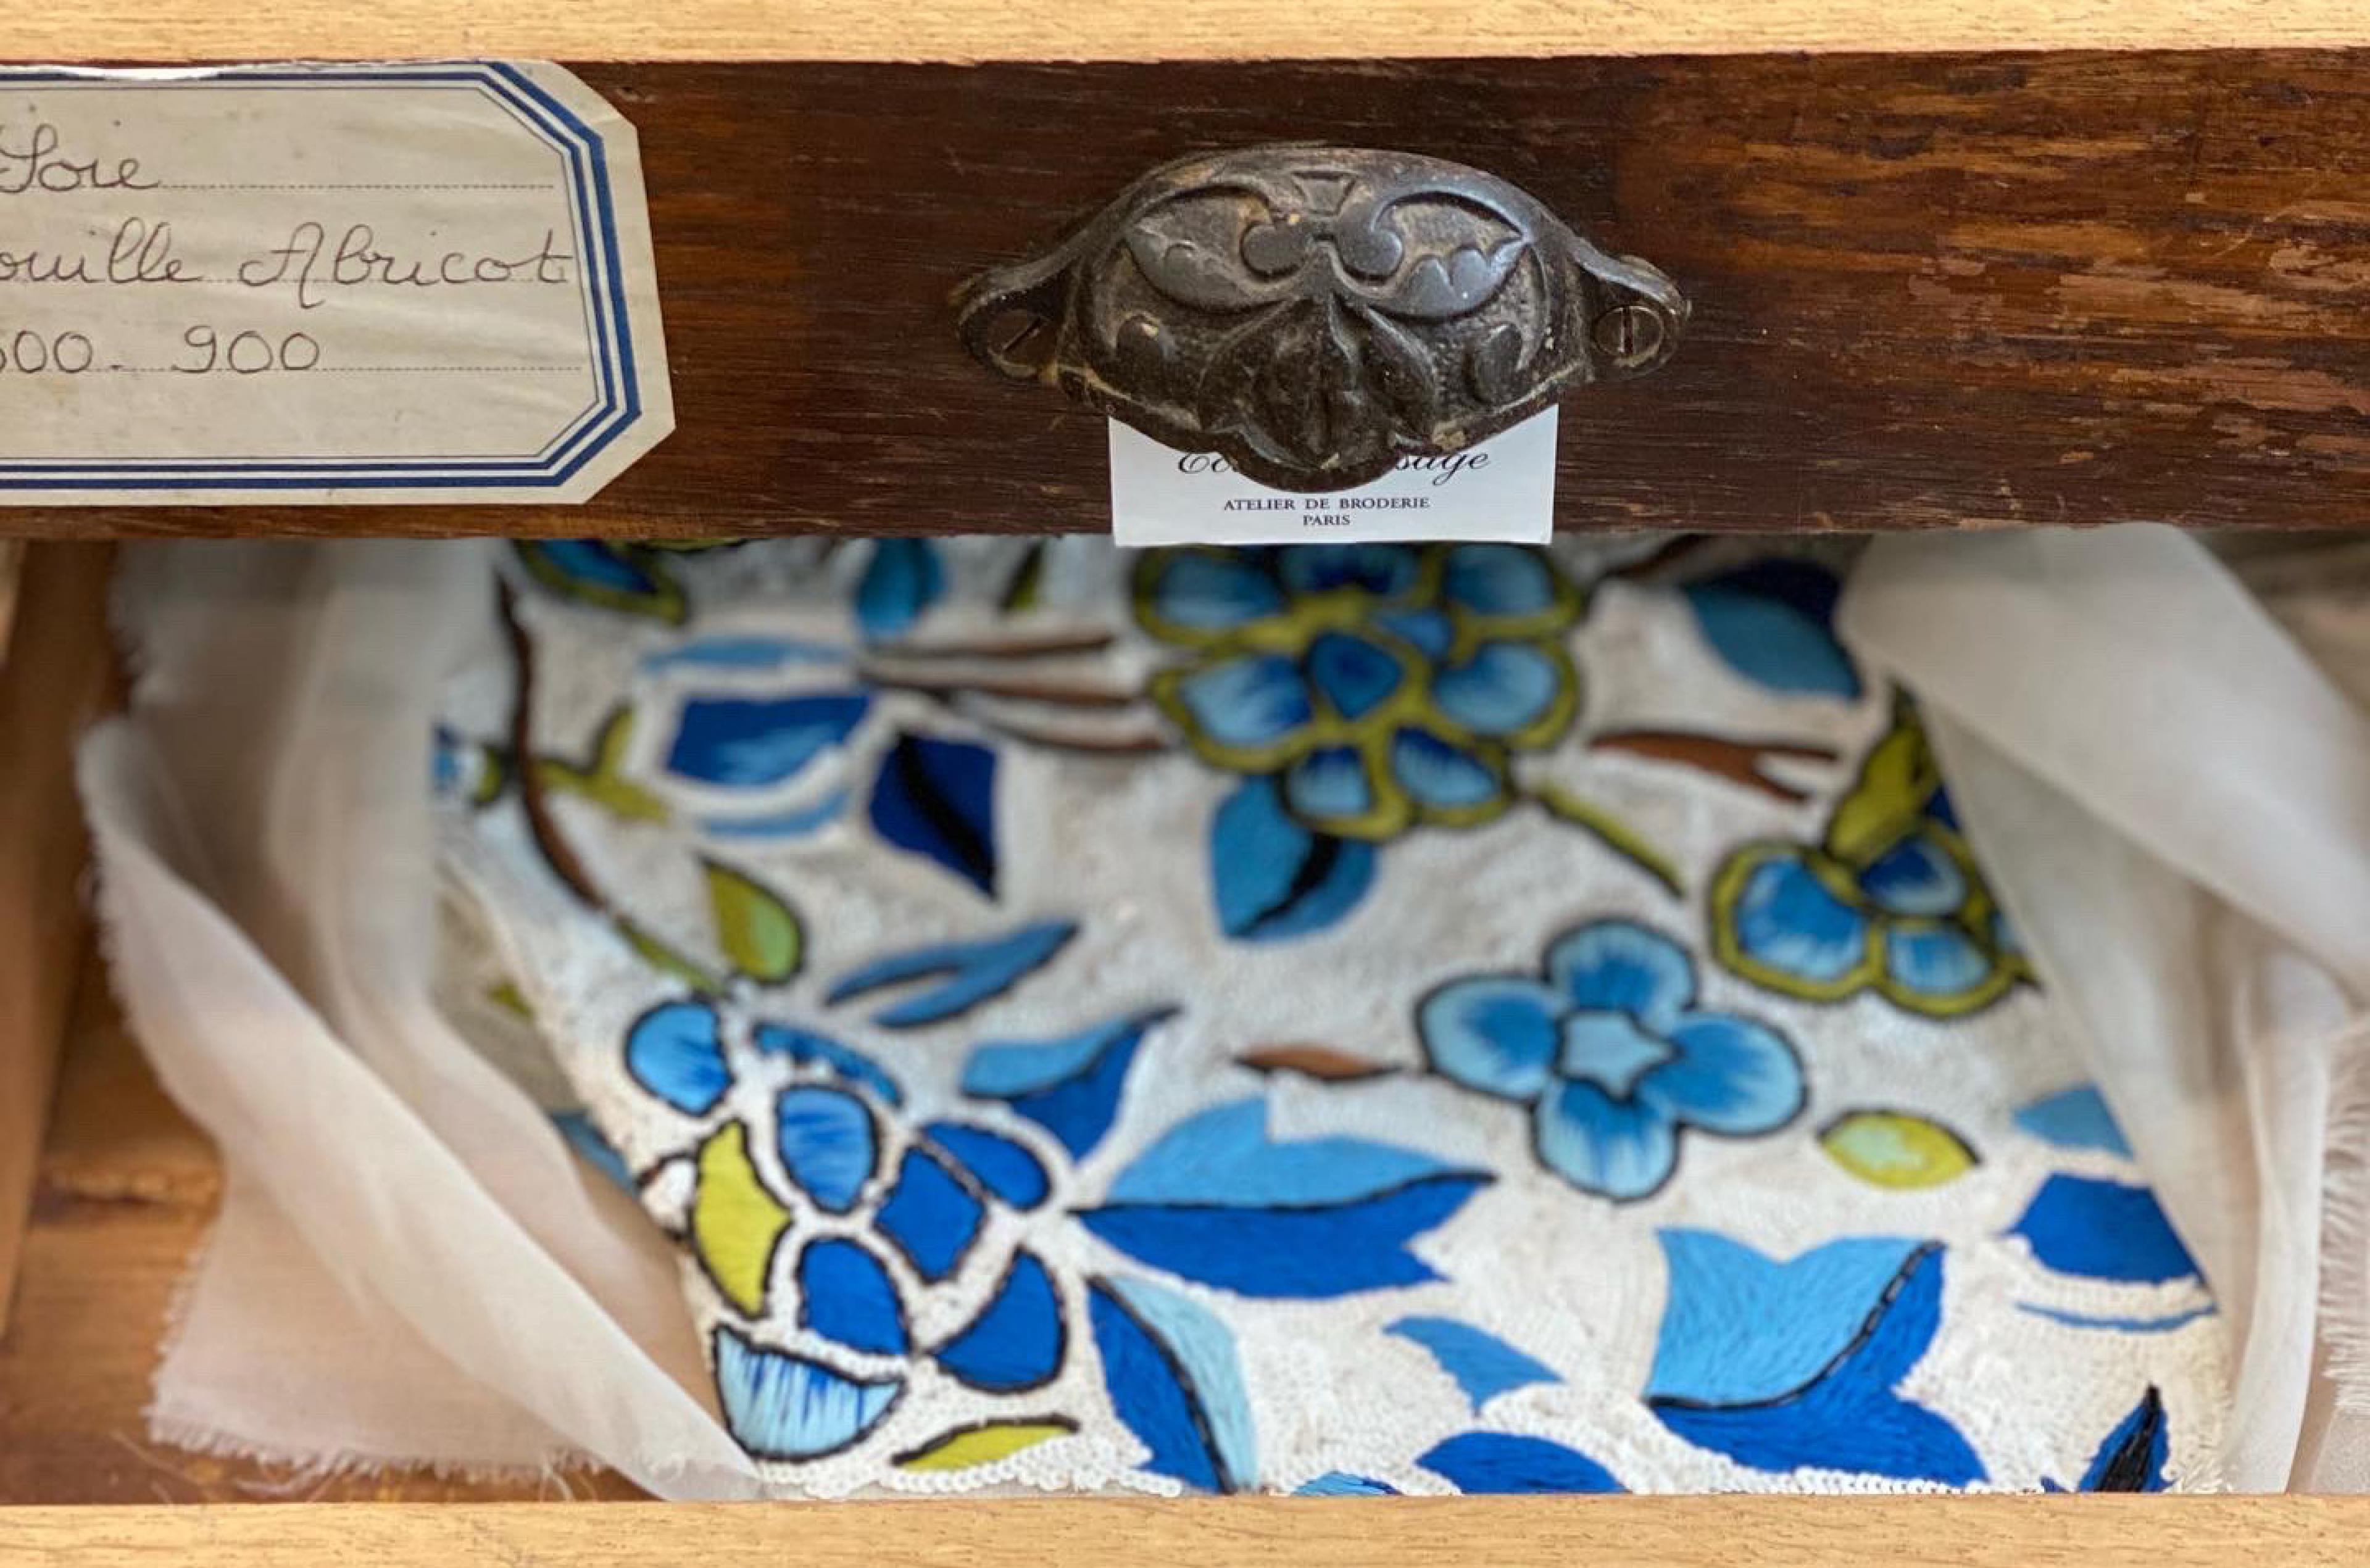 floral fabric in an ornate drawer